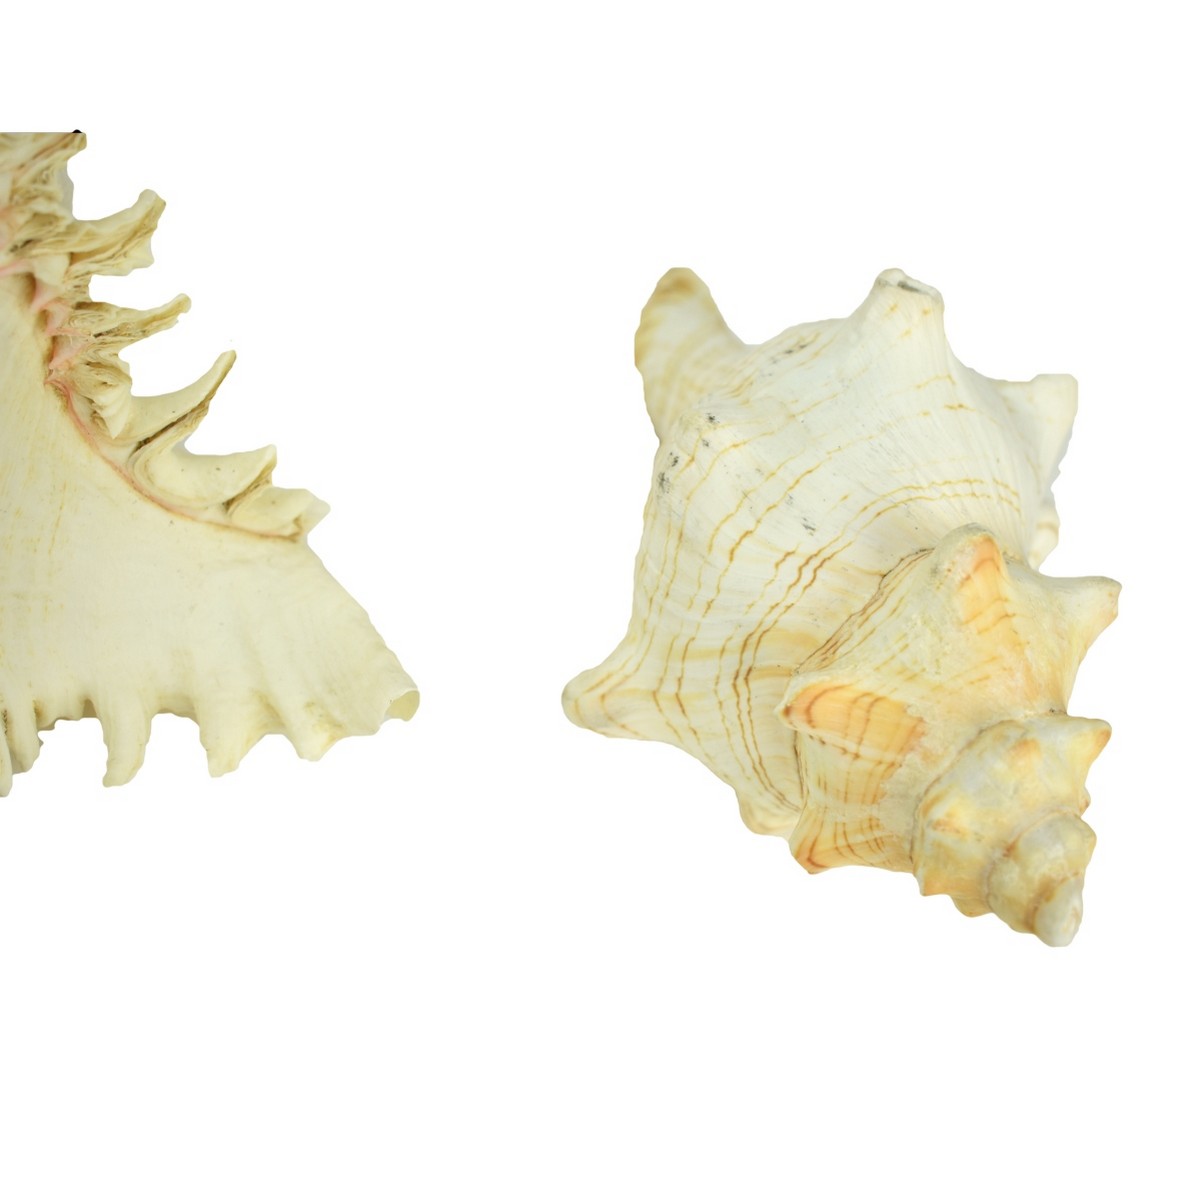 Collection Of Five (5) Conch Shells